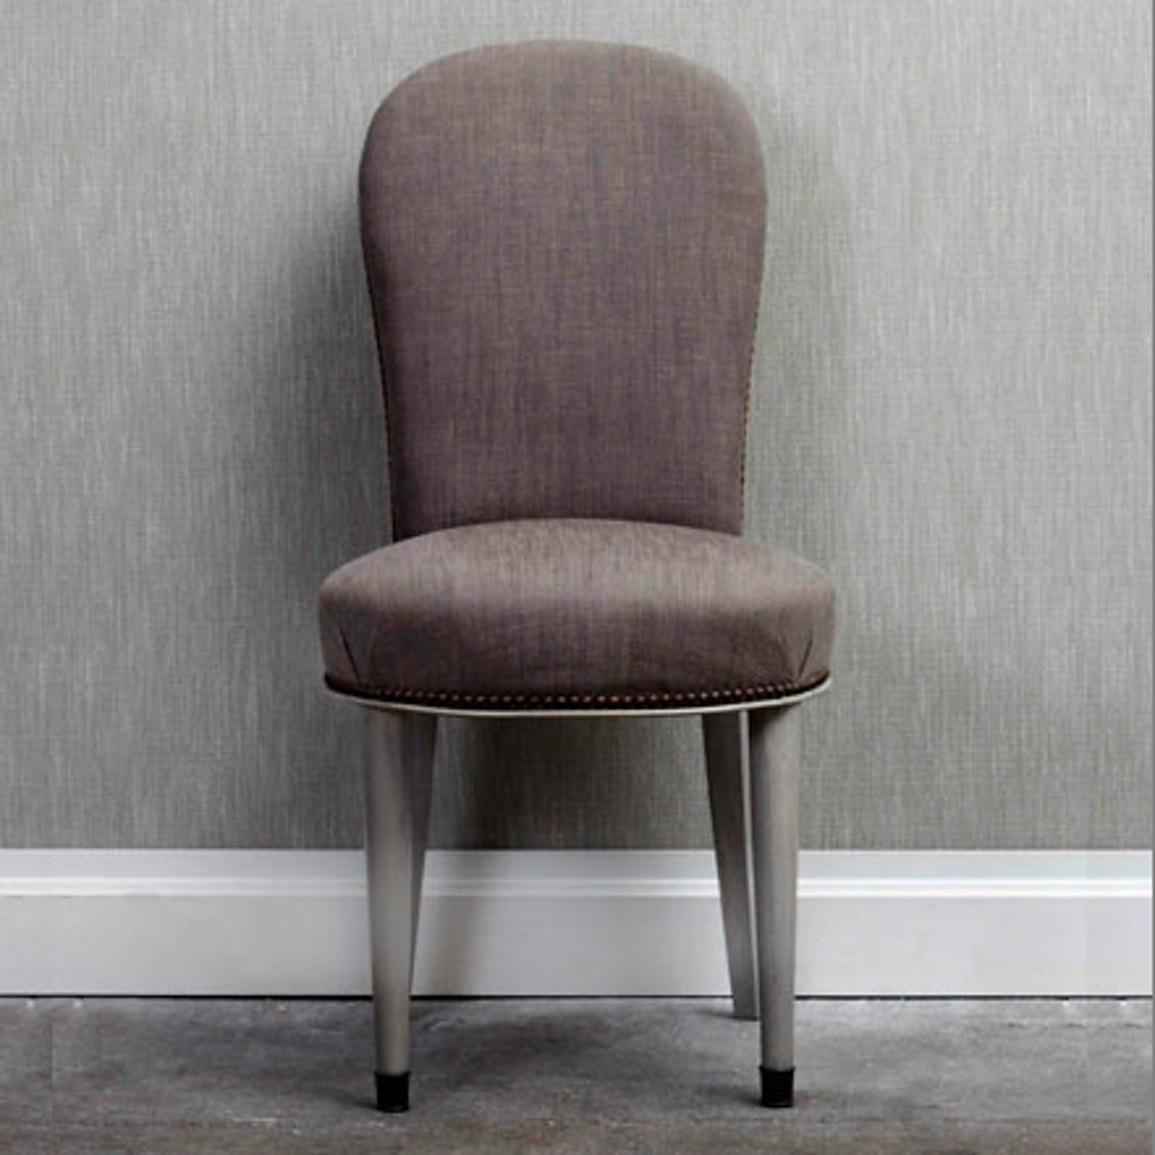 Armless dining chair with rabbet detailing and nailhead trim. The Charles Chair frame is constructed using solid maple wood. Four finishes available for chair legs. Available in four Cotton fabric options or can be upholstered using customer's own